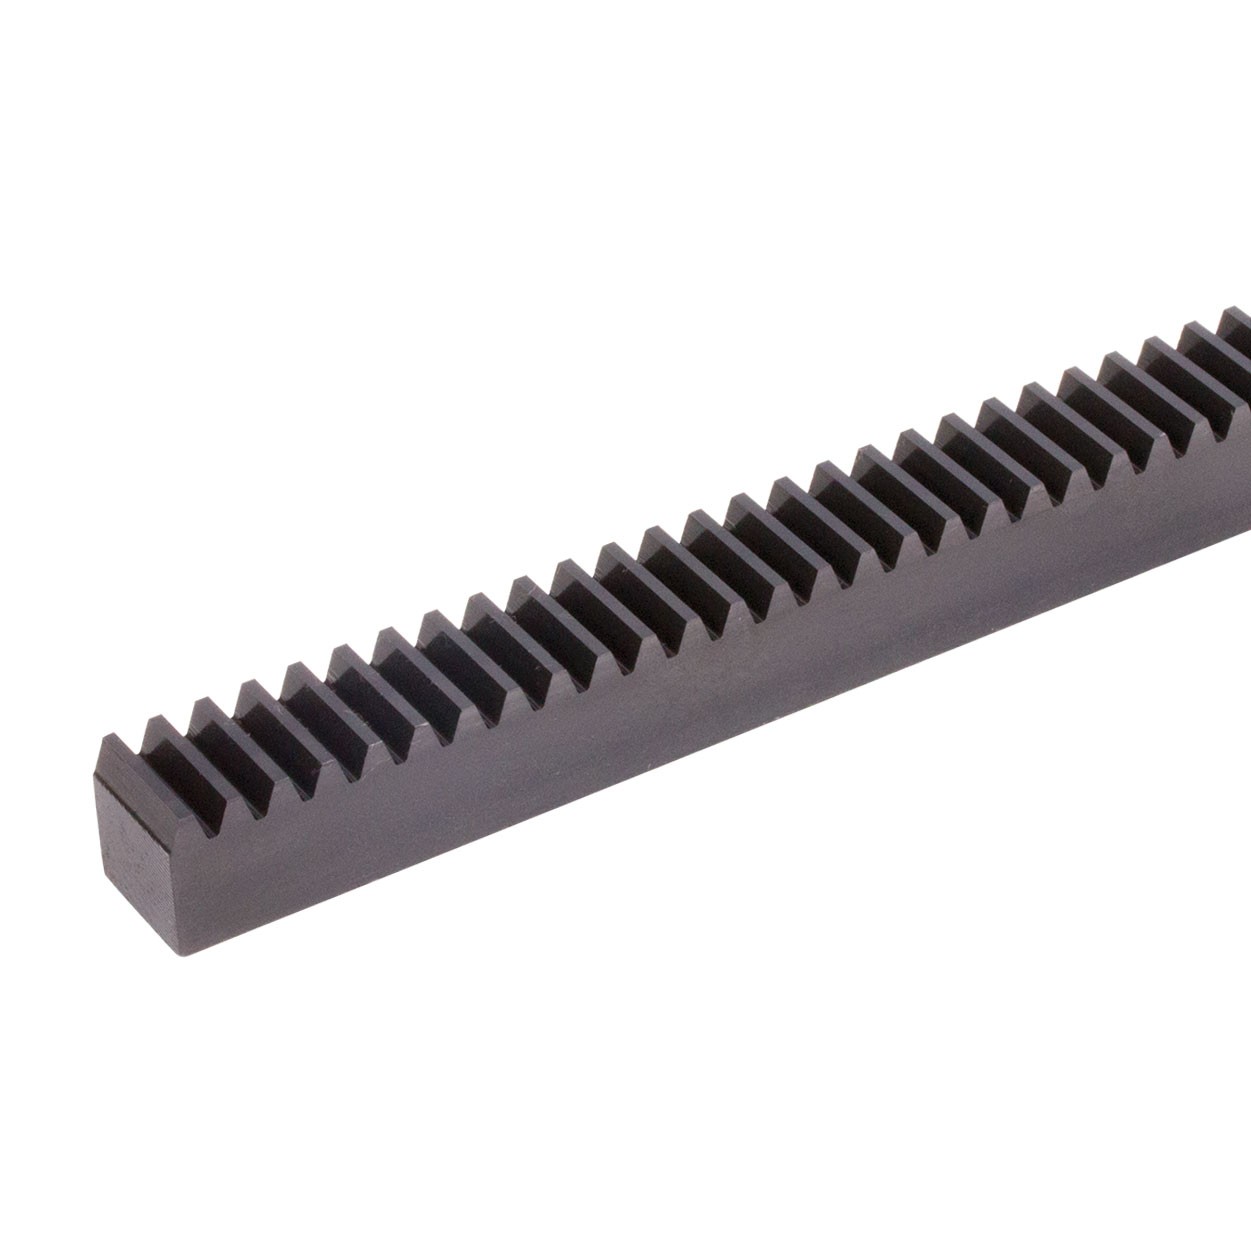 Gear rack made of steel C45 black oxide finished module 1.5 tooth width  15mm height 15mm nominal length 1000mm SKU: 22811605 - Maedler North America